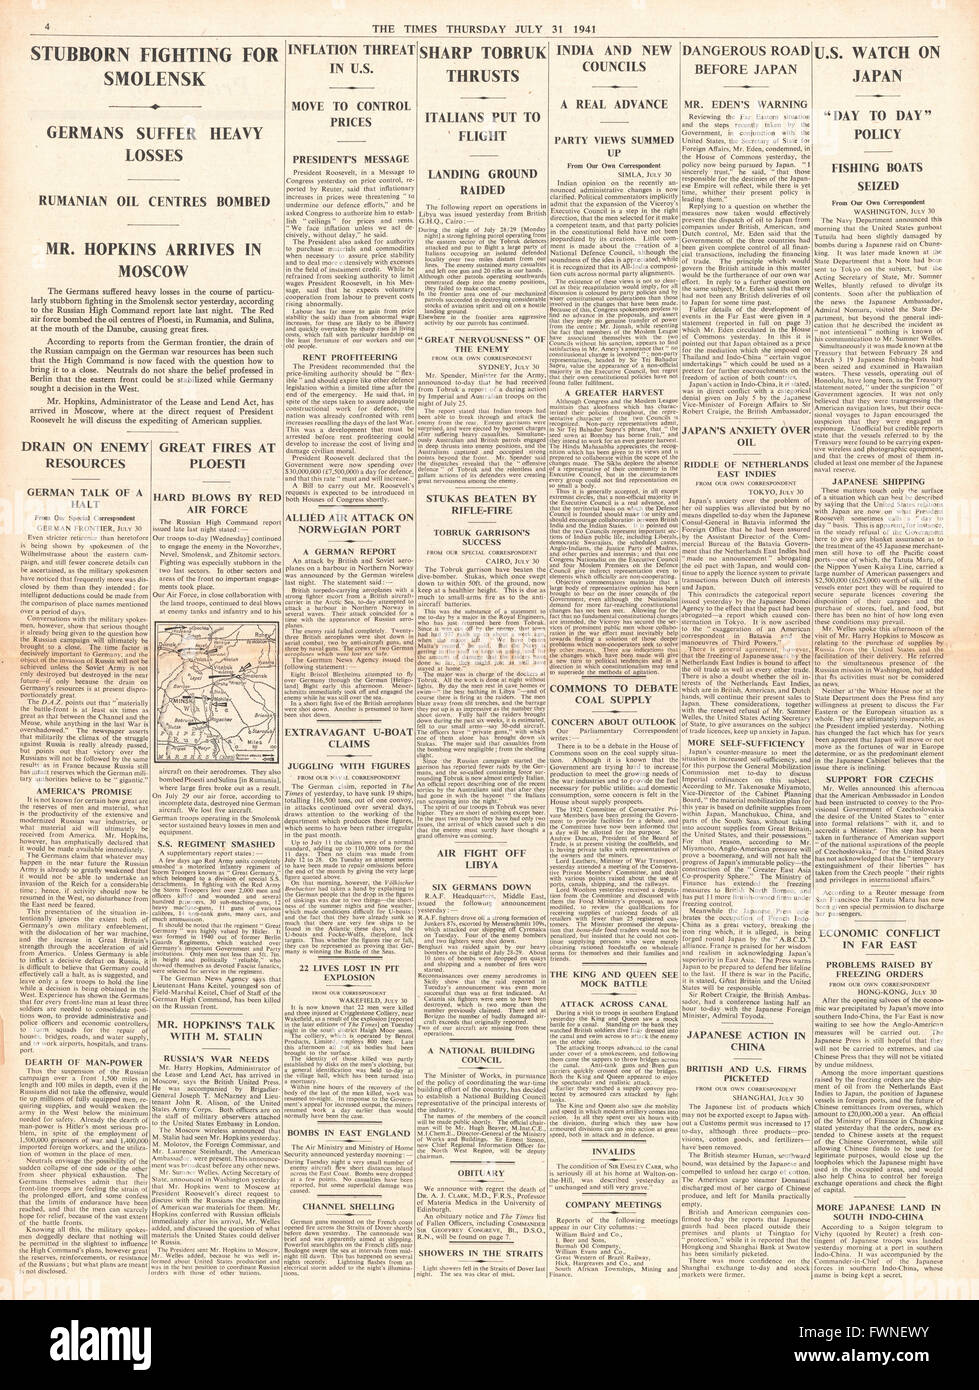 1941 page 4  The Times Battle for Smolensk, Battle for Tobruk and U.S. Watch Japan Stock Photo